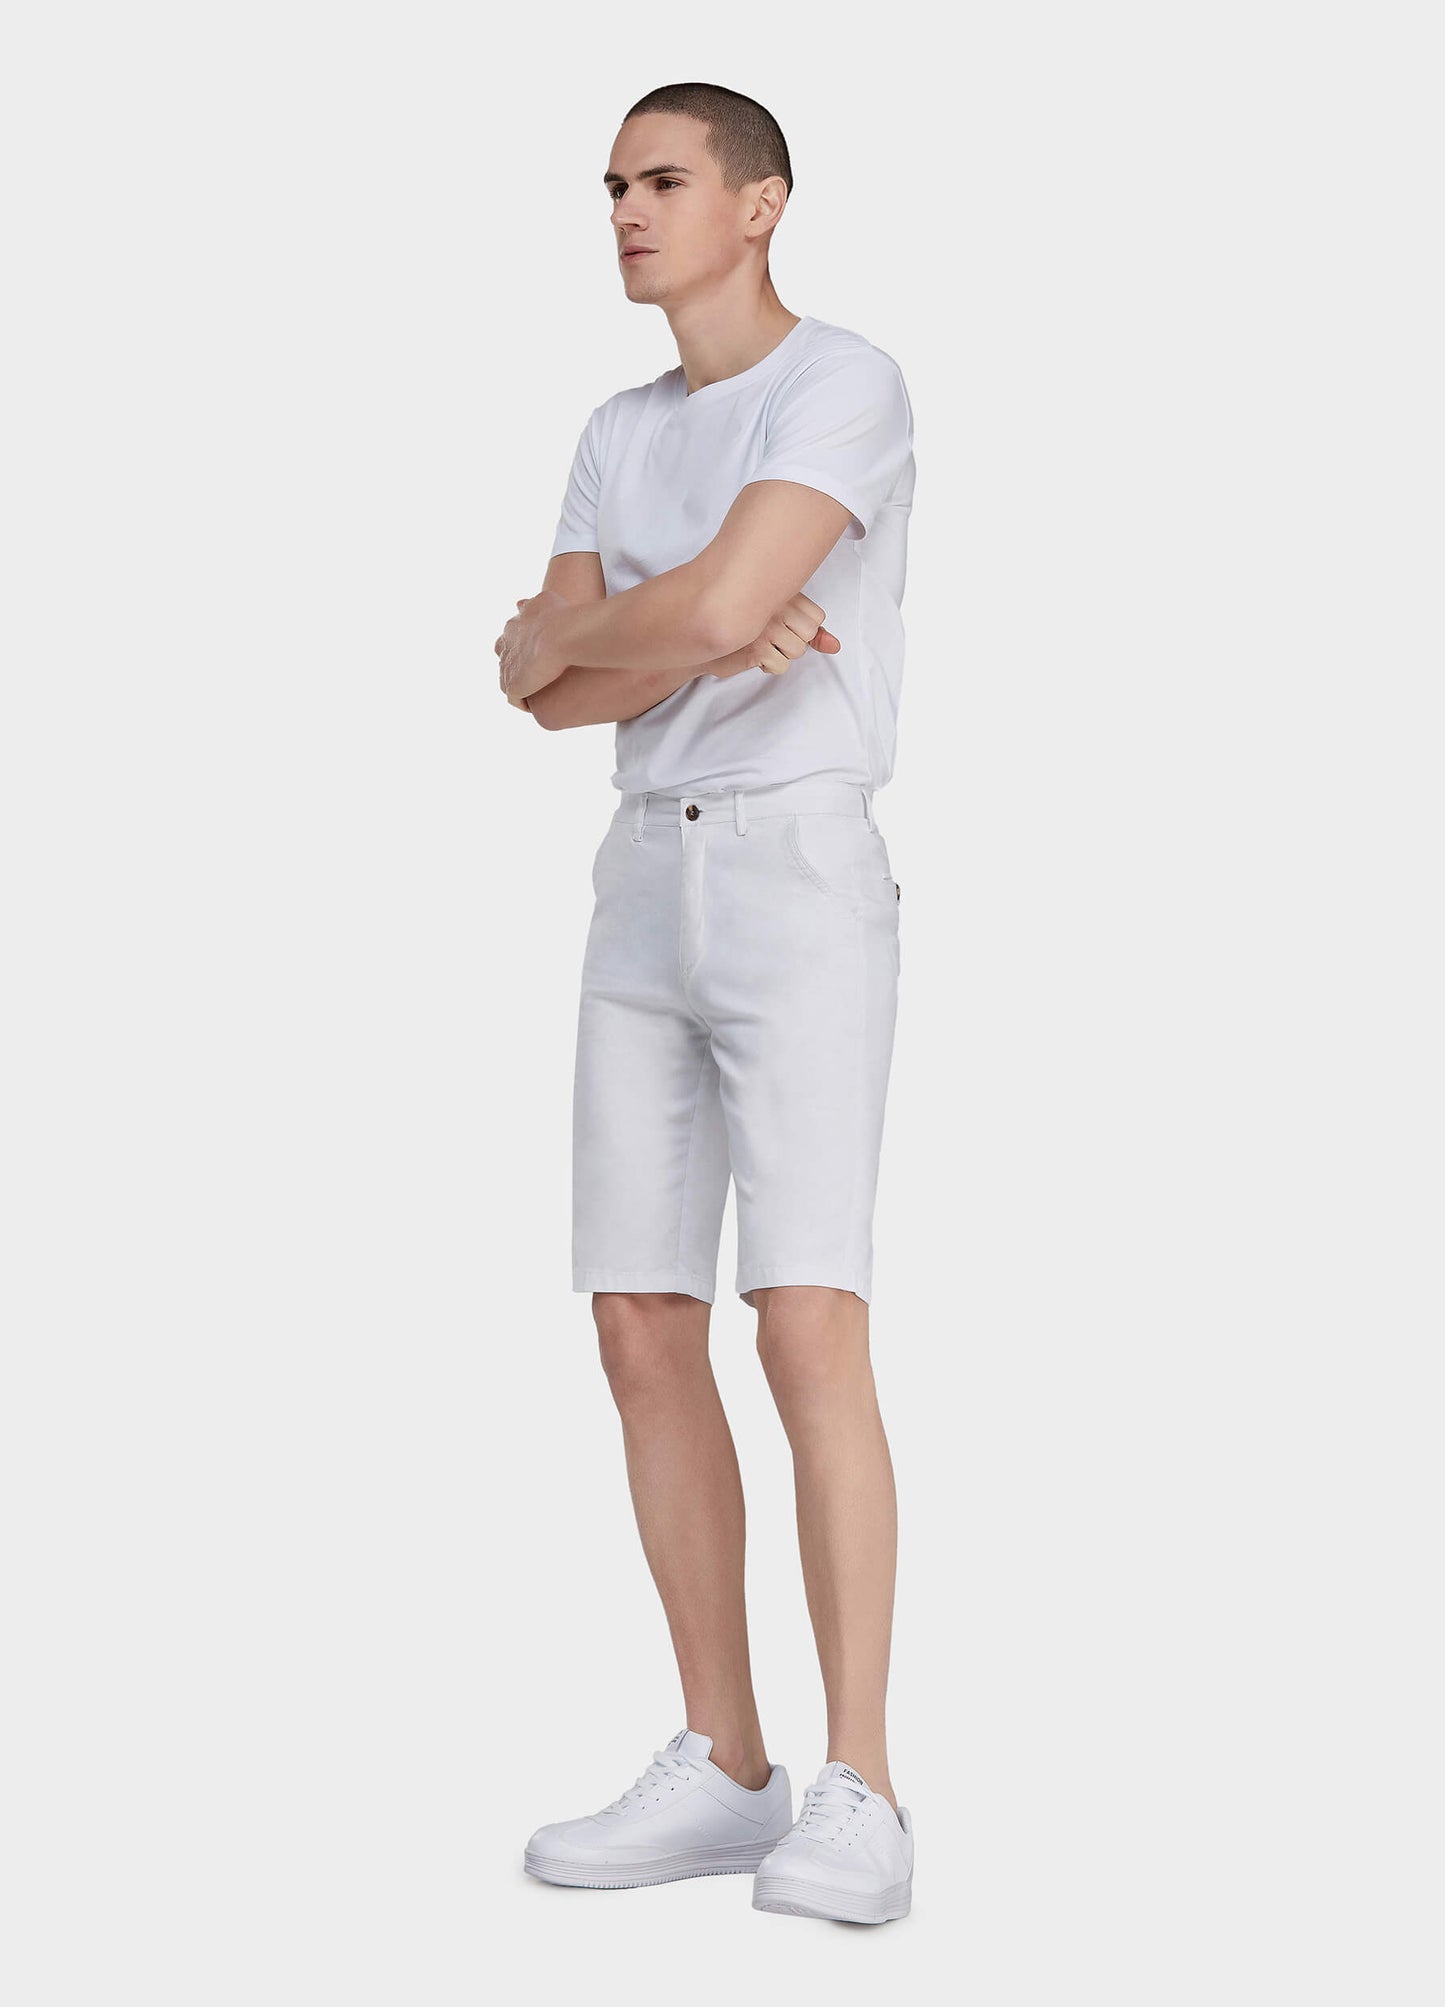 Men's Casual Zipper Fly Button Solid Shorts with Slant Pocket-White side view